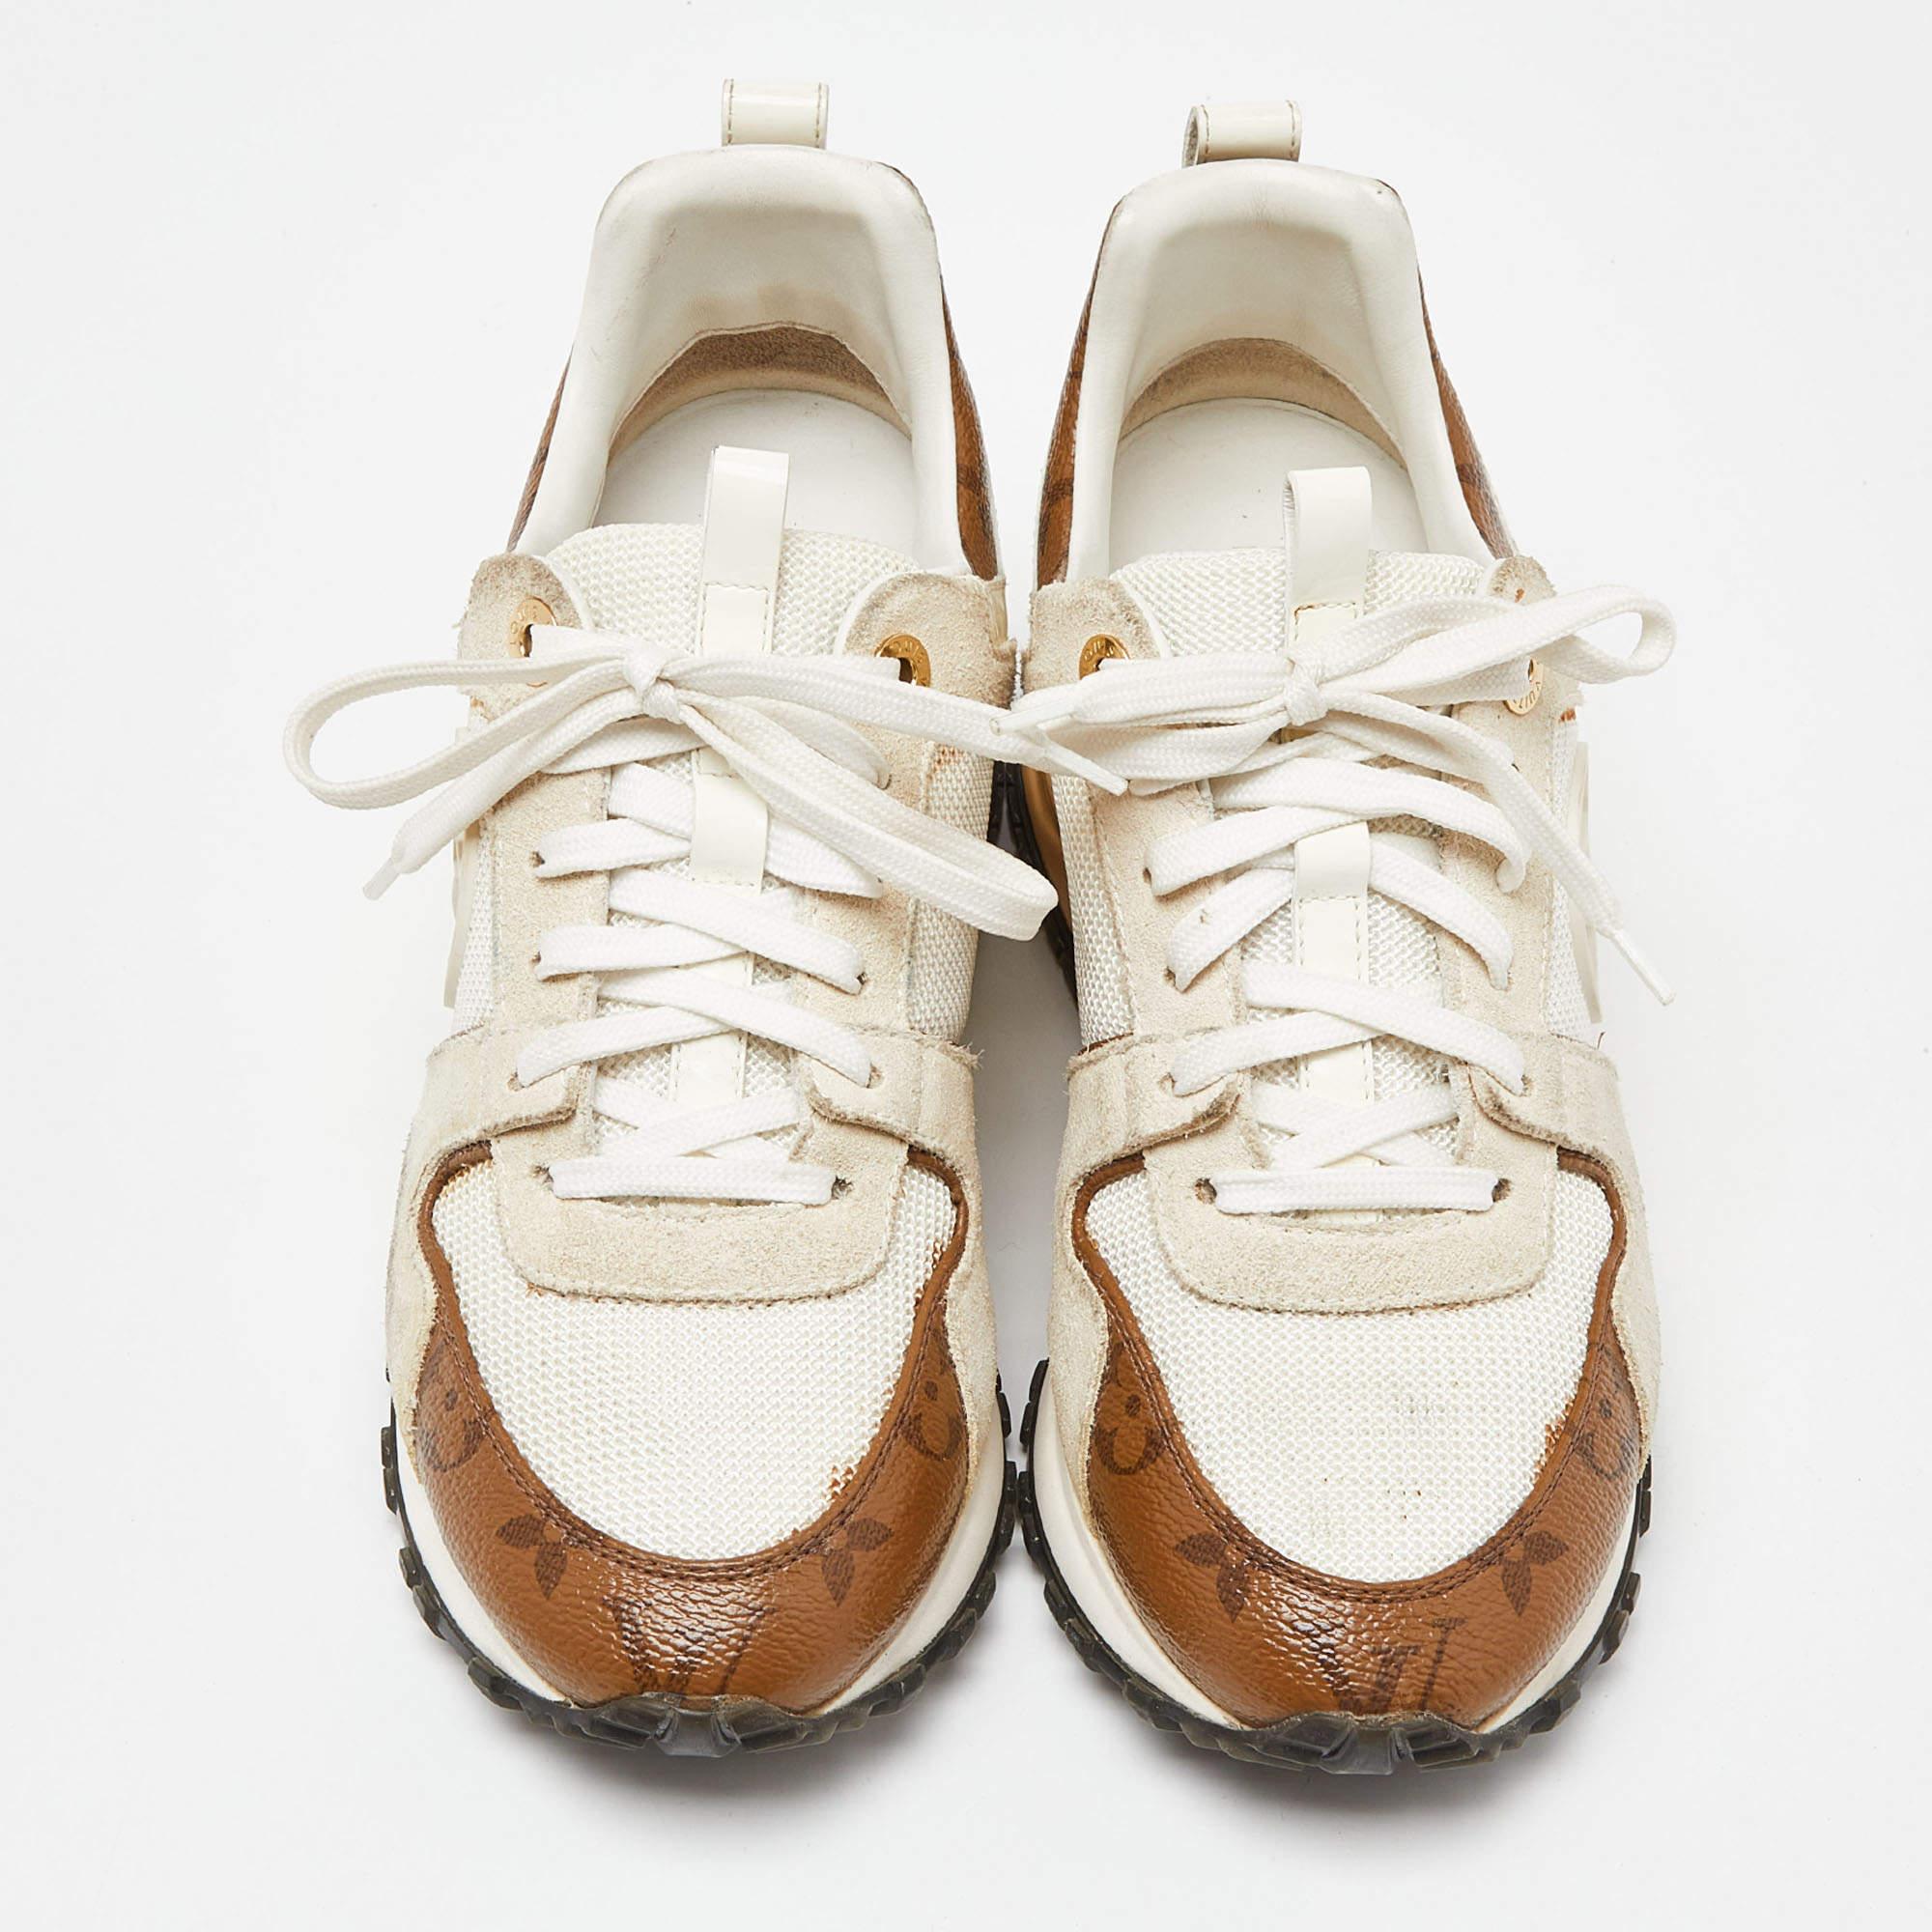 Add a statement appeal to your outfit with these Louis Vuitton sneakers. Made from premium materials, they feature lace-up vamps and relaxing footbeds. The rubber sole of this pair aims to provide you with everyday ease.

